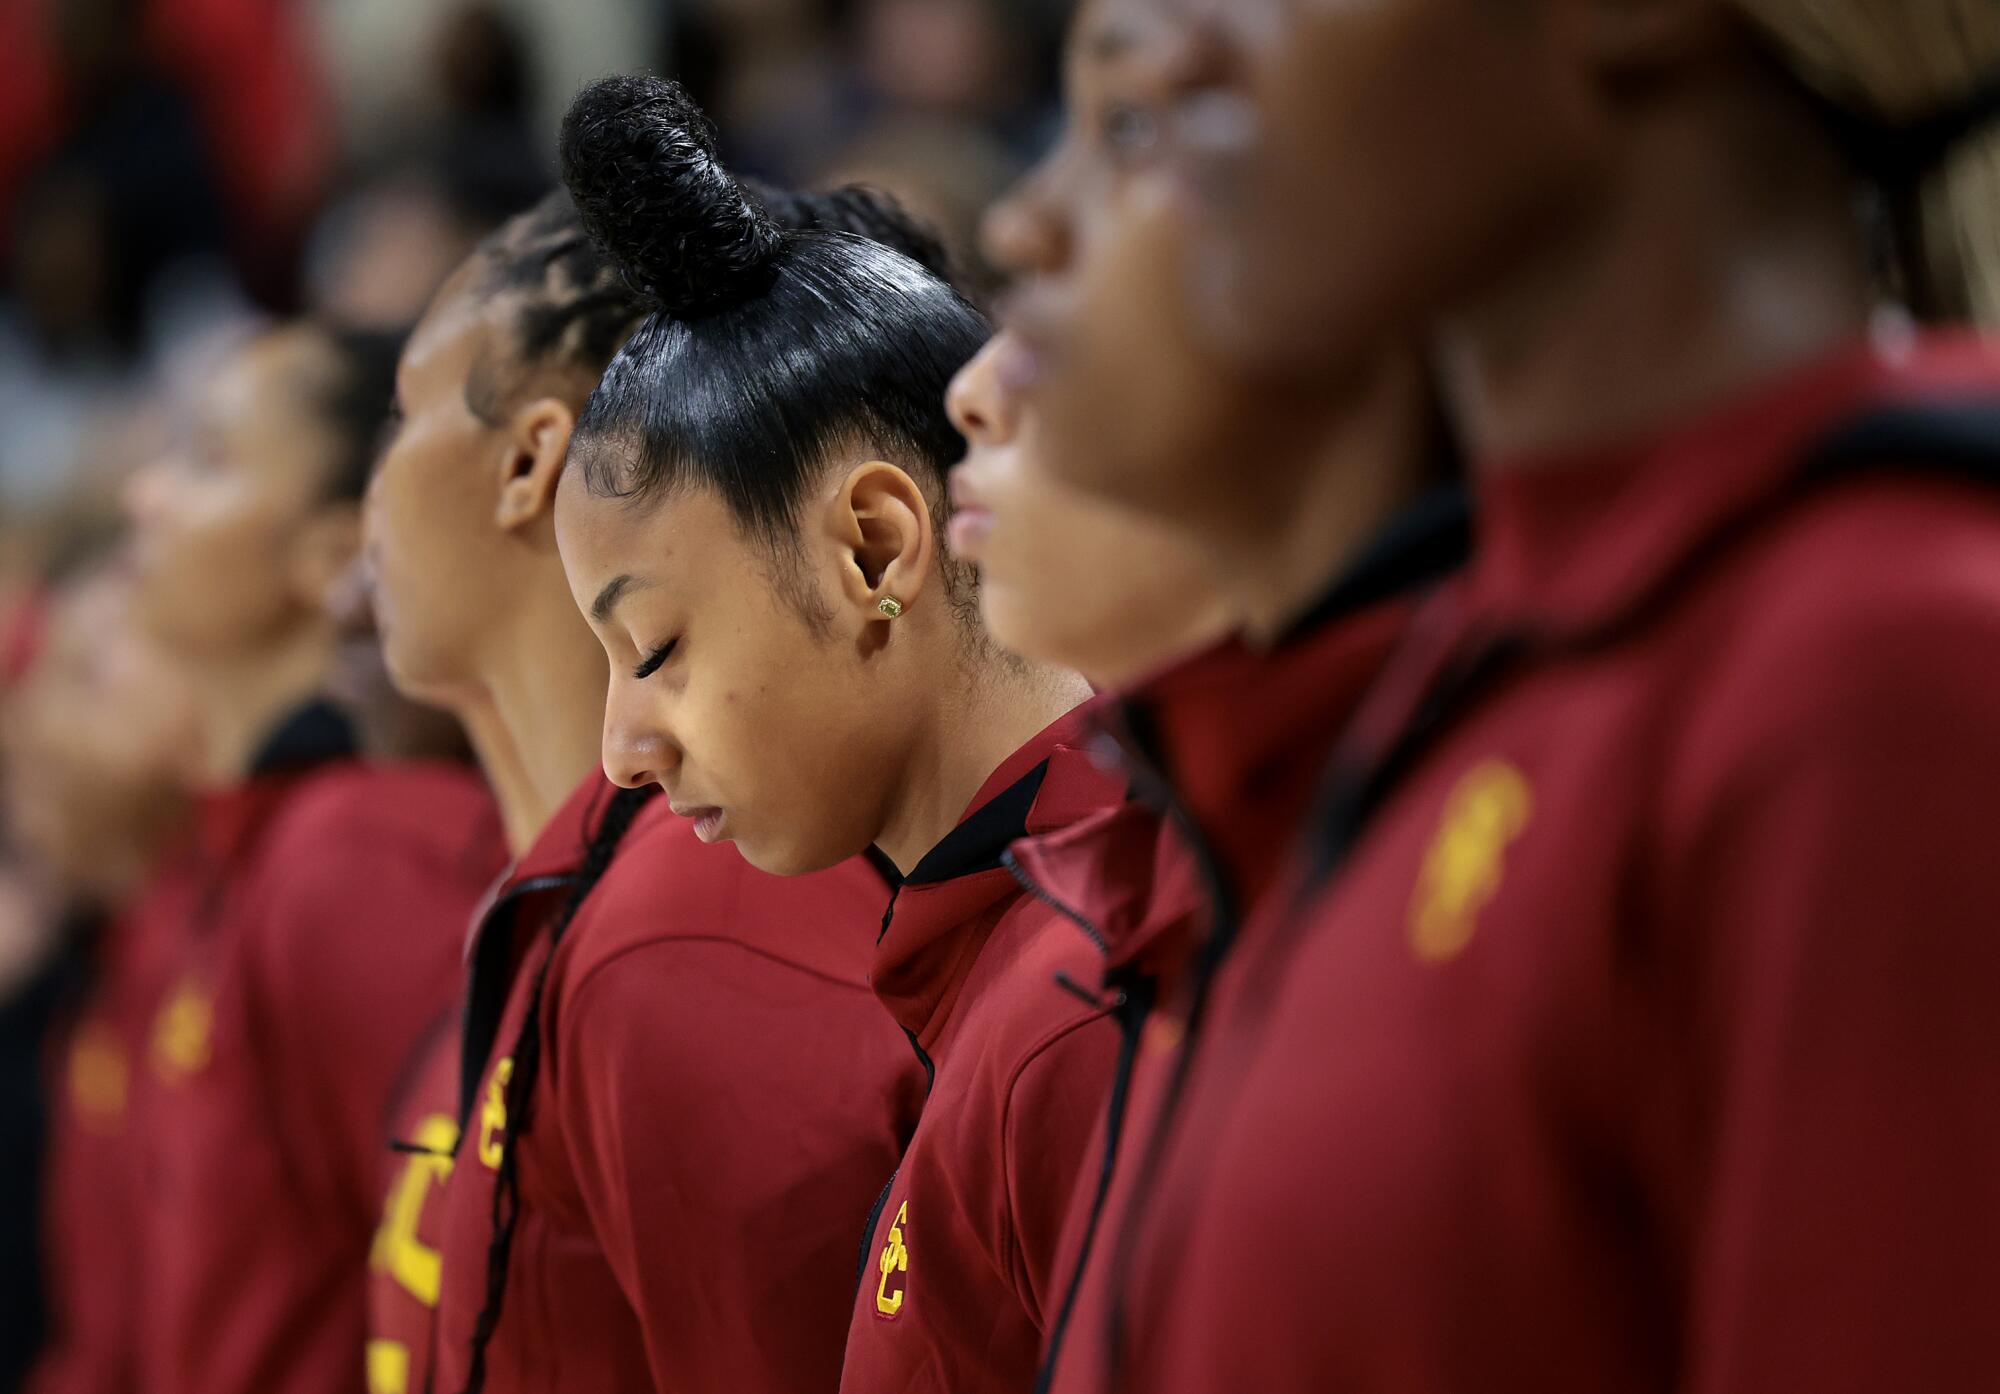 USC freshman guard Juju Watkins stands with her eyes closed before a recent game at Long Beach State.